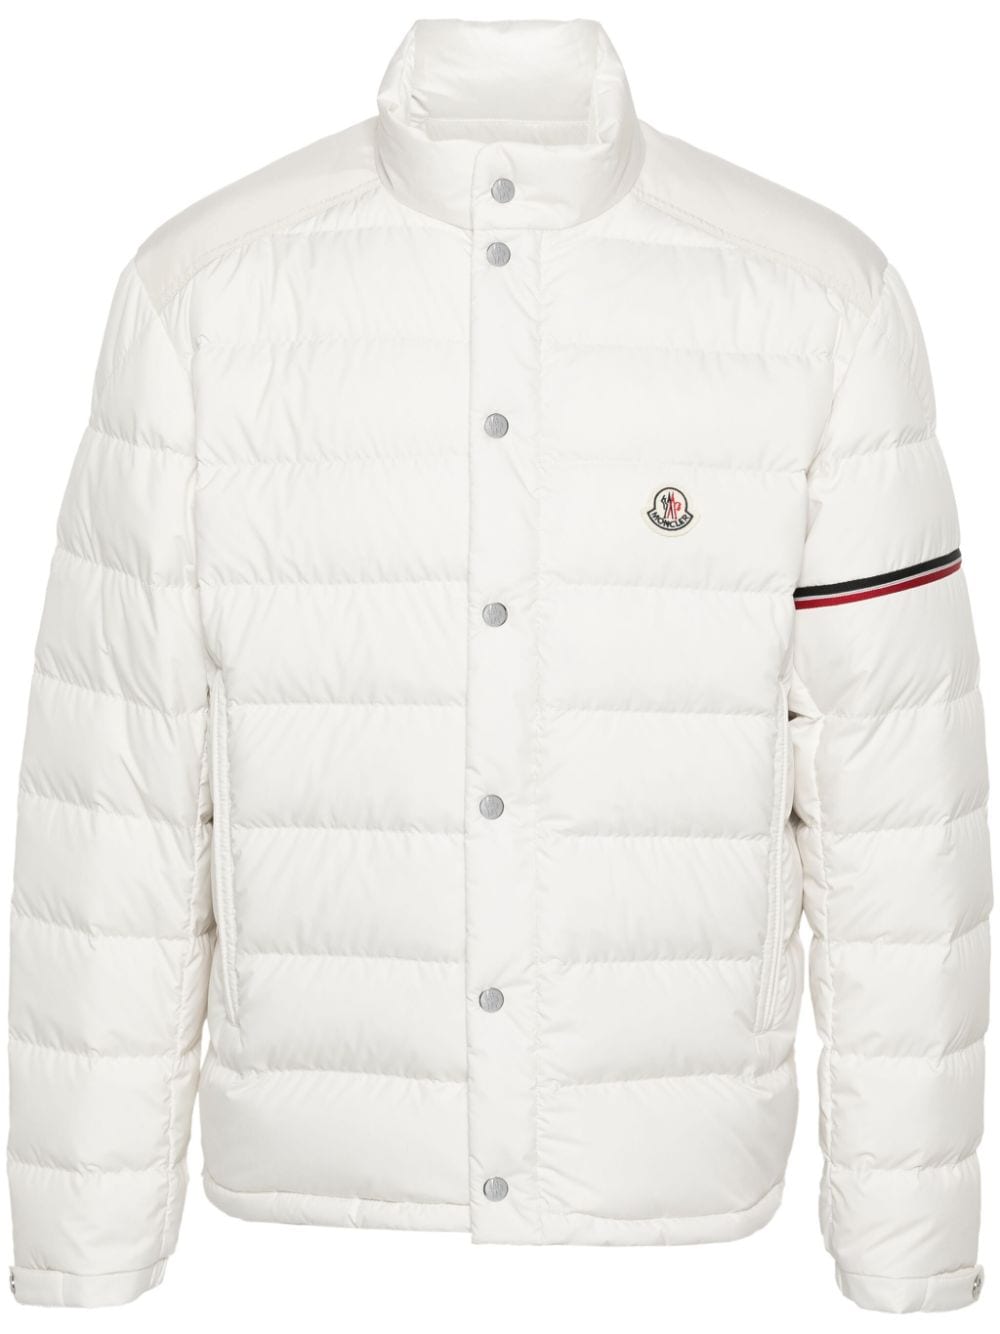 Colomb puffer jacket<BR/><BR/>